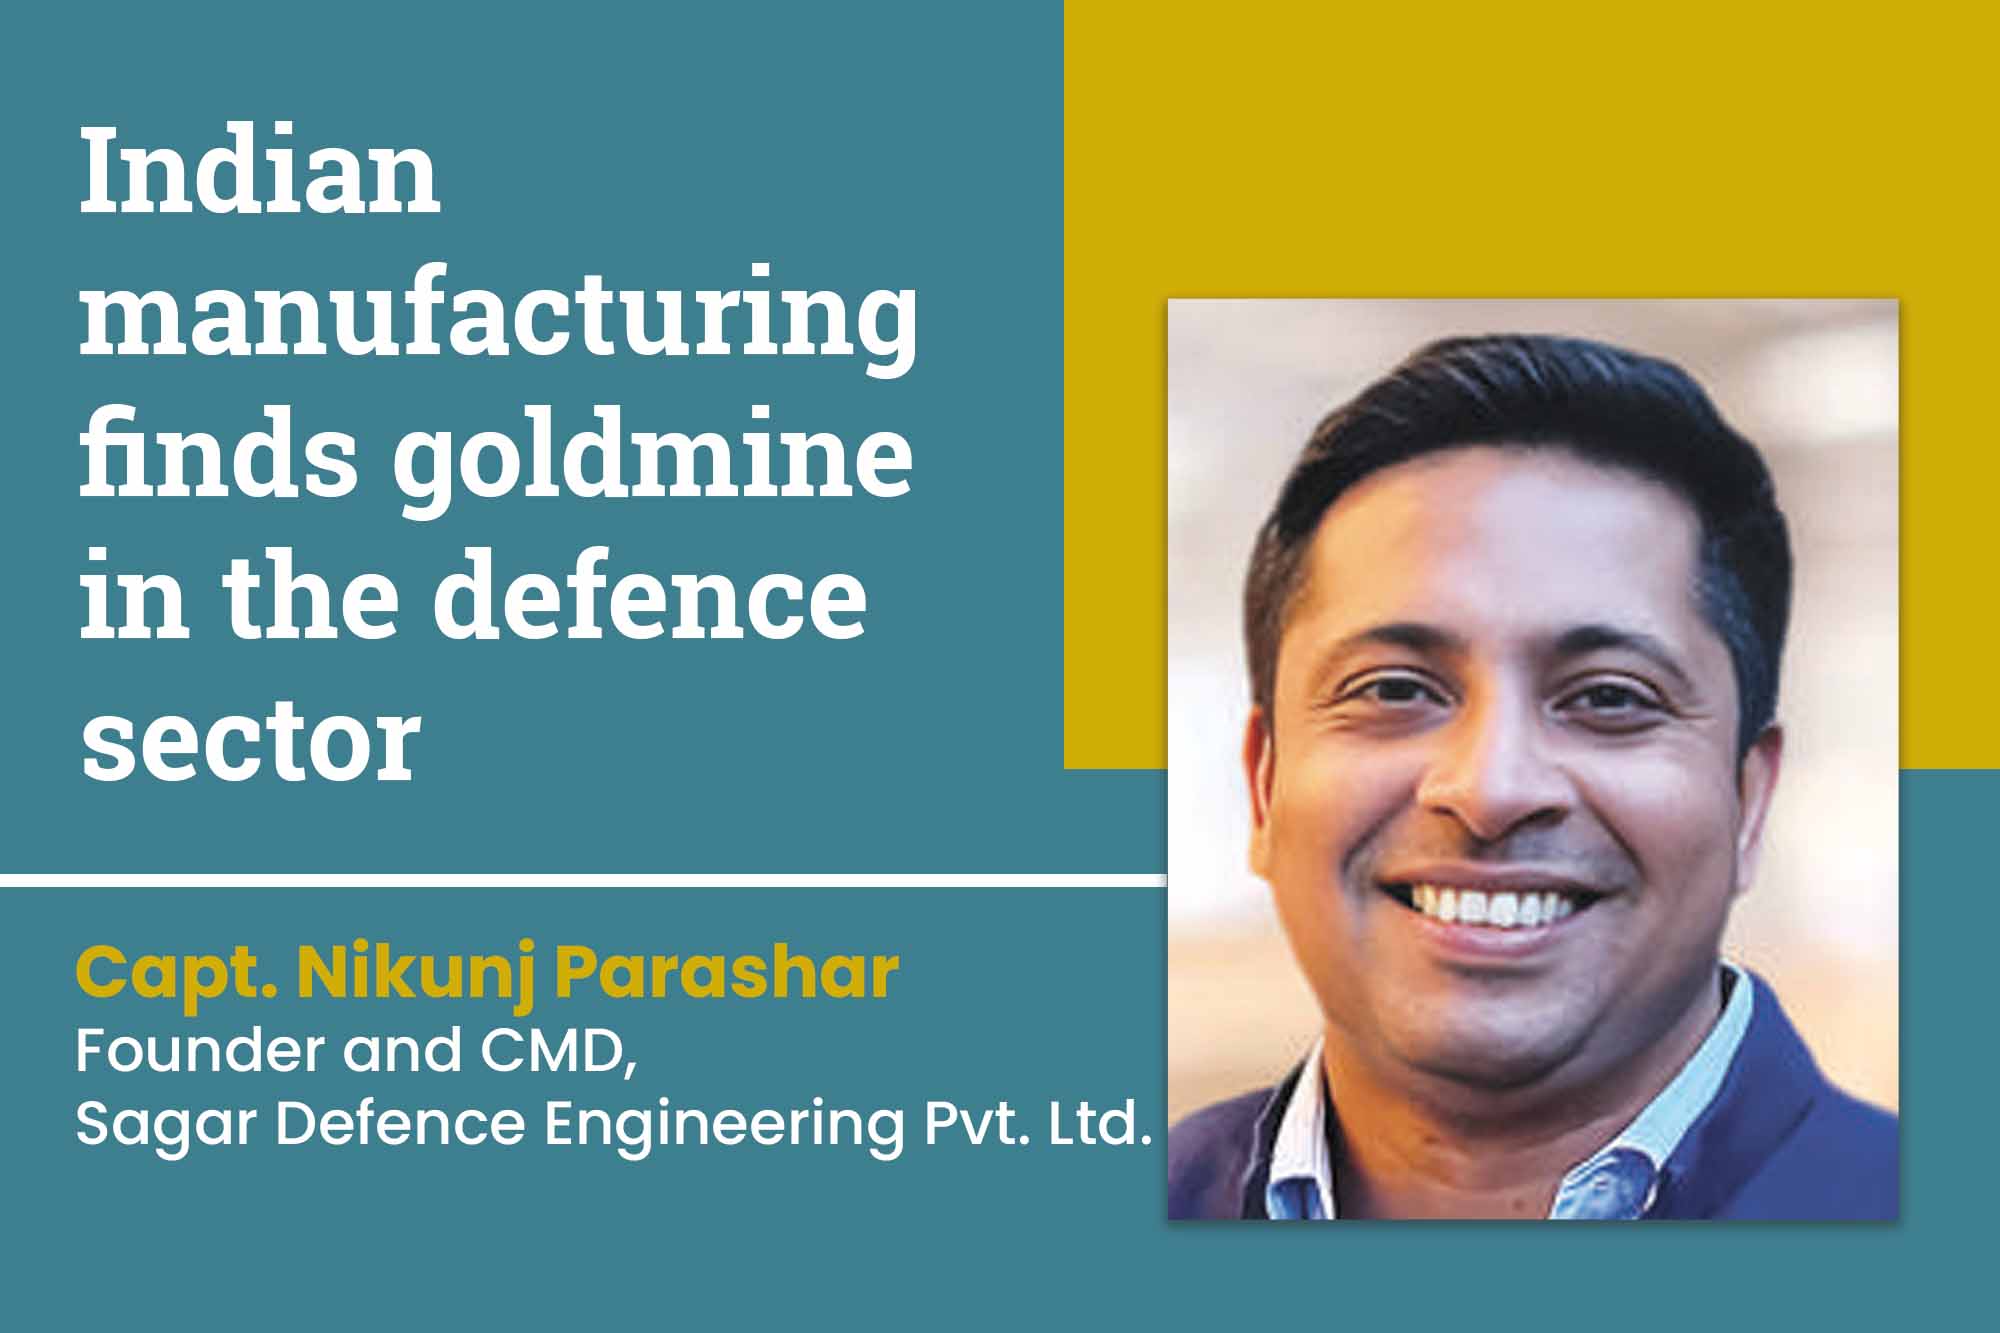 Indian manufacturing finds goldmine in the defence sector